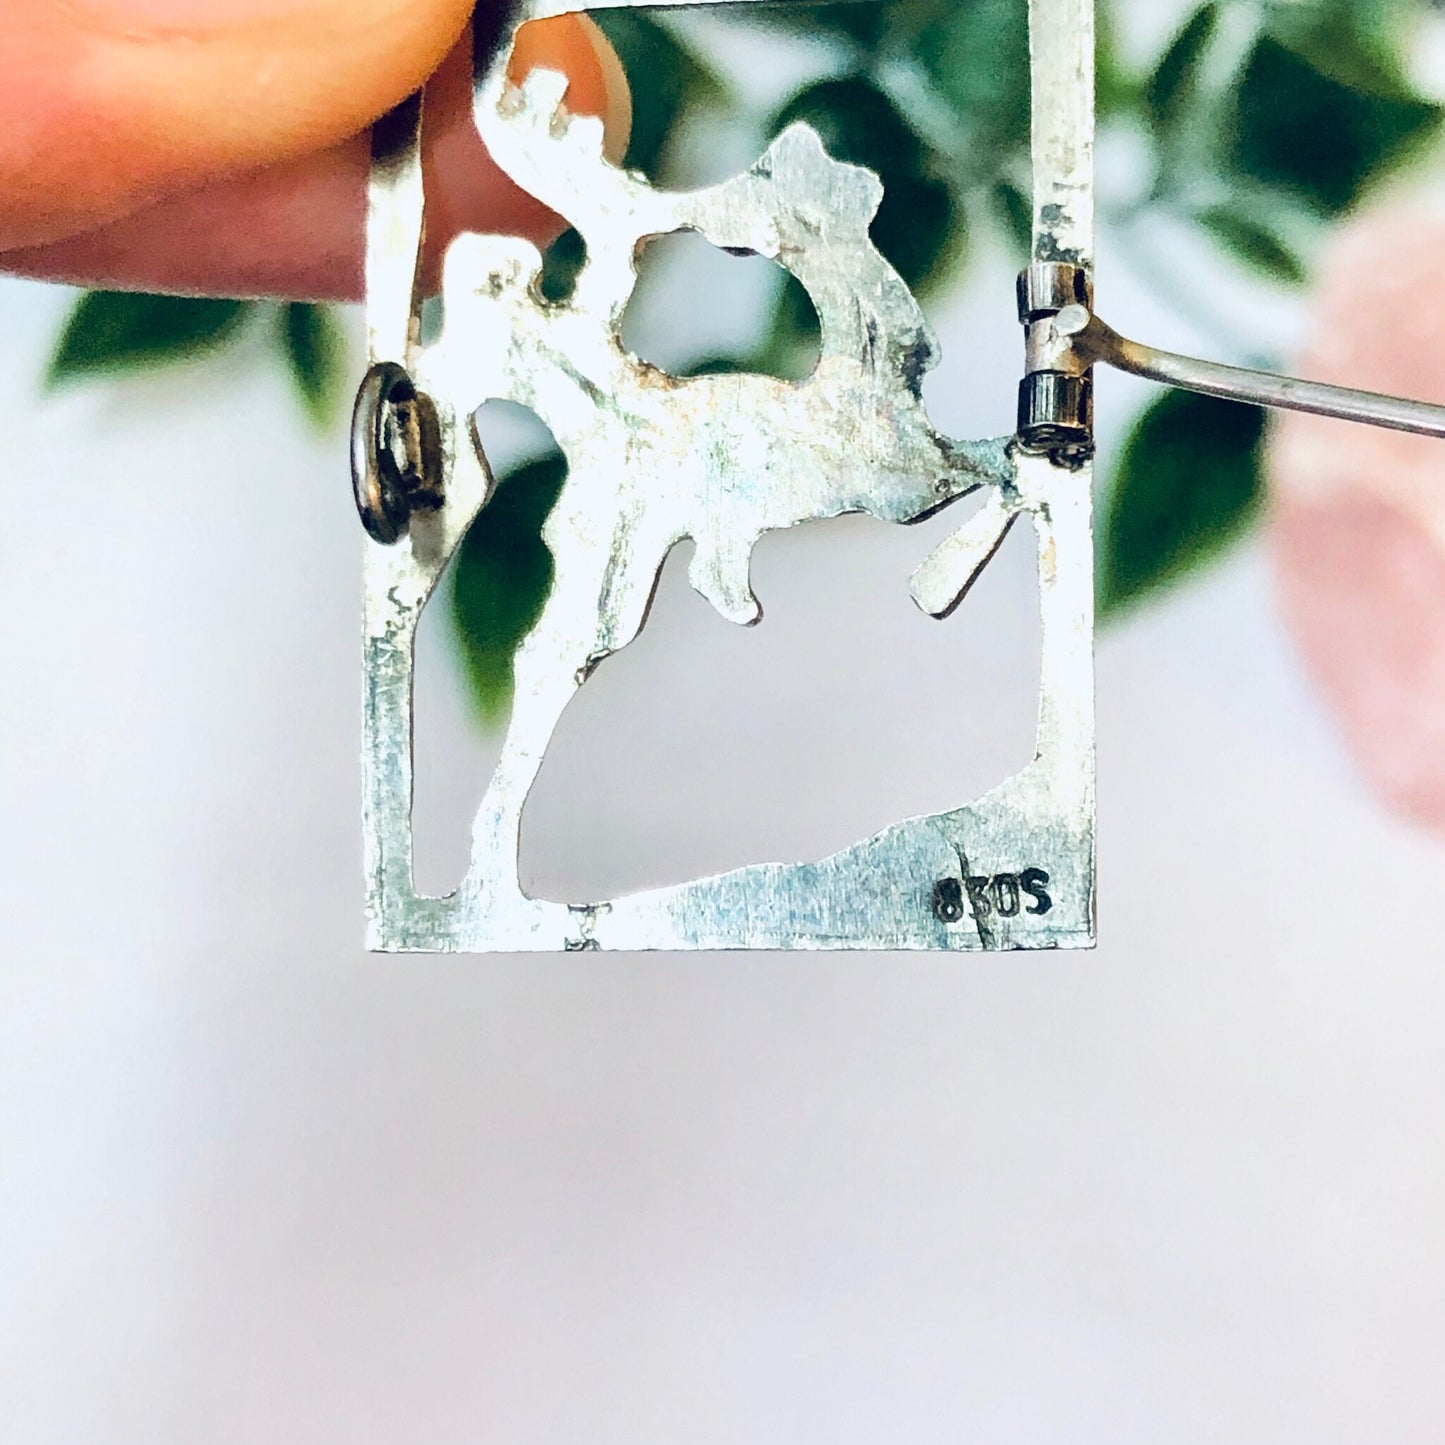 Vintage silver deer brooch featuring cut-out silhouette of man riding deer, unique animal-shaped pin jewelry.